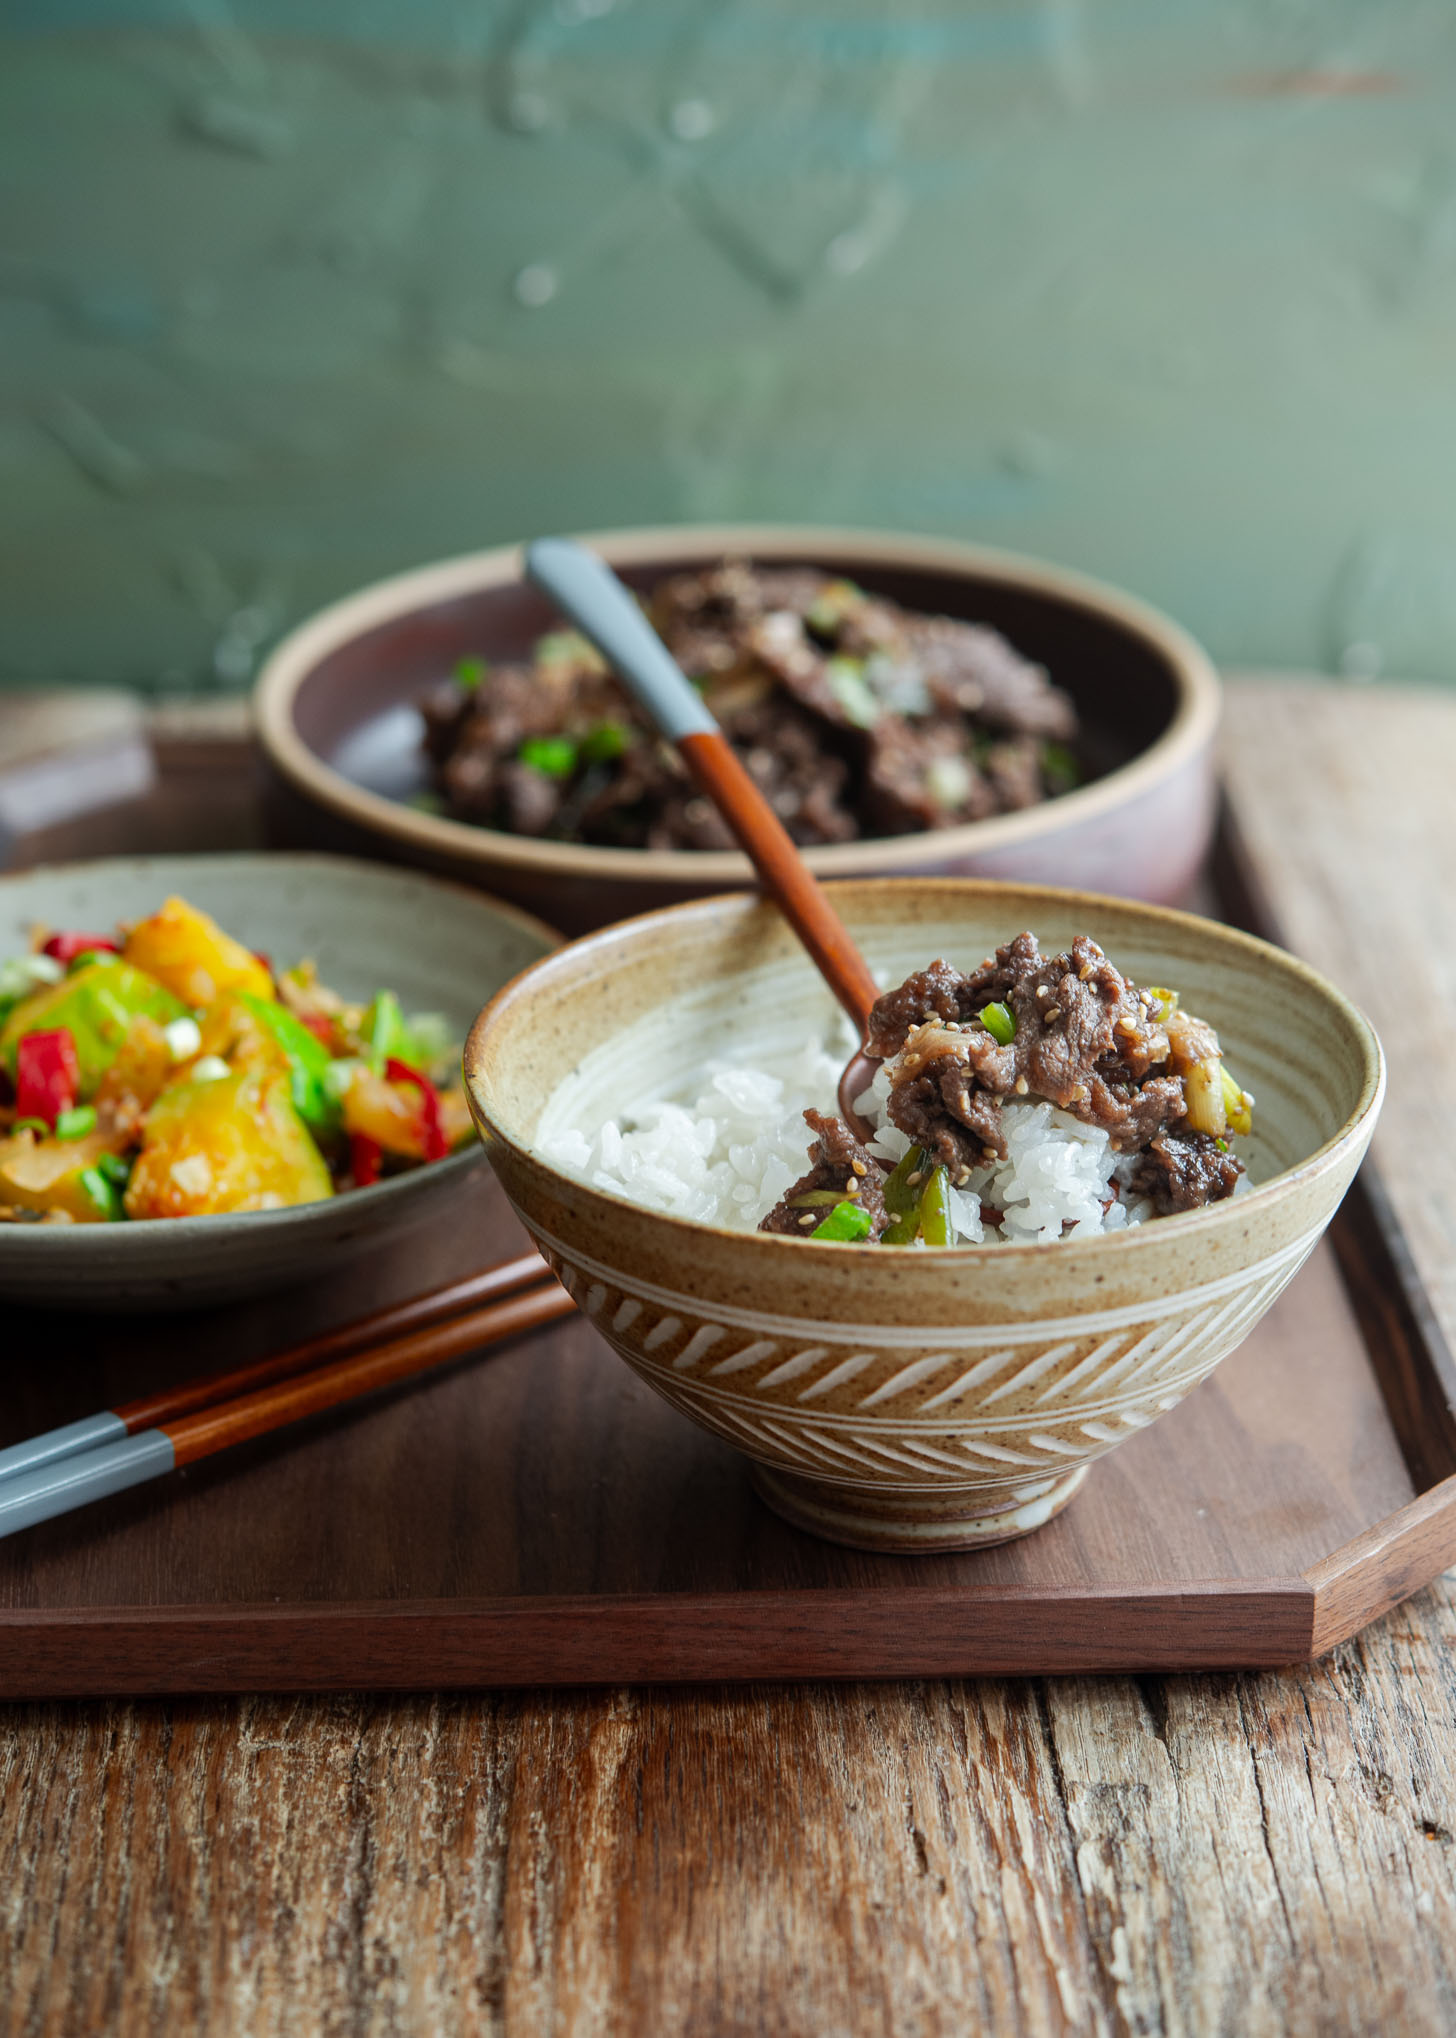 Bulgogi (Korean BBQ beef) served in classic Korean way with rice and side dish.